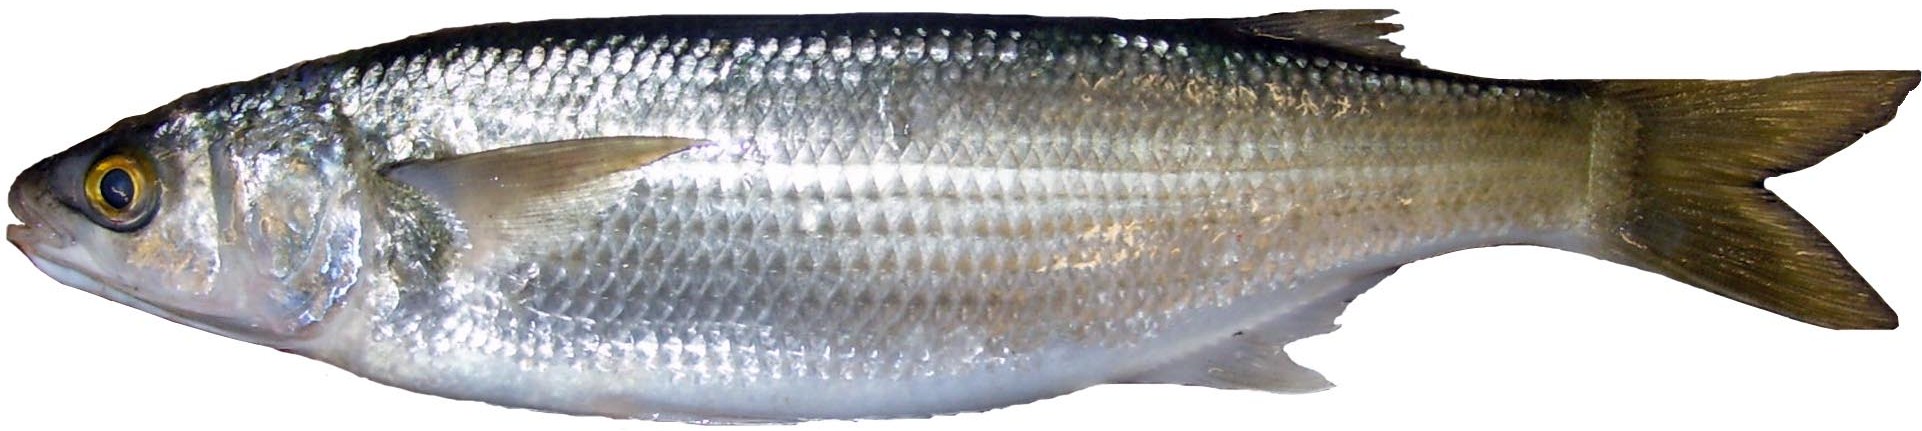 Coorong Mullet